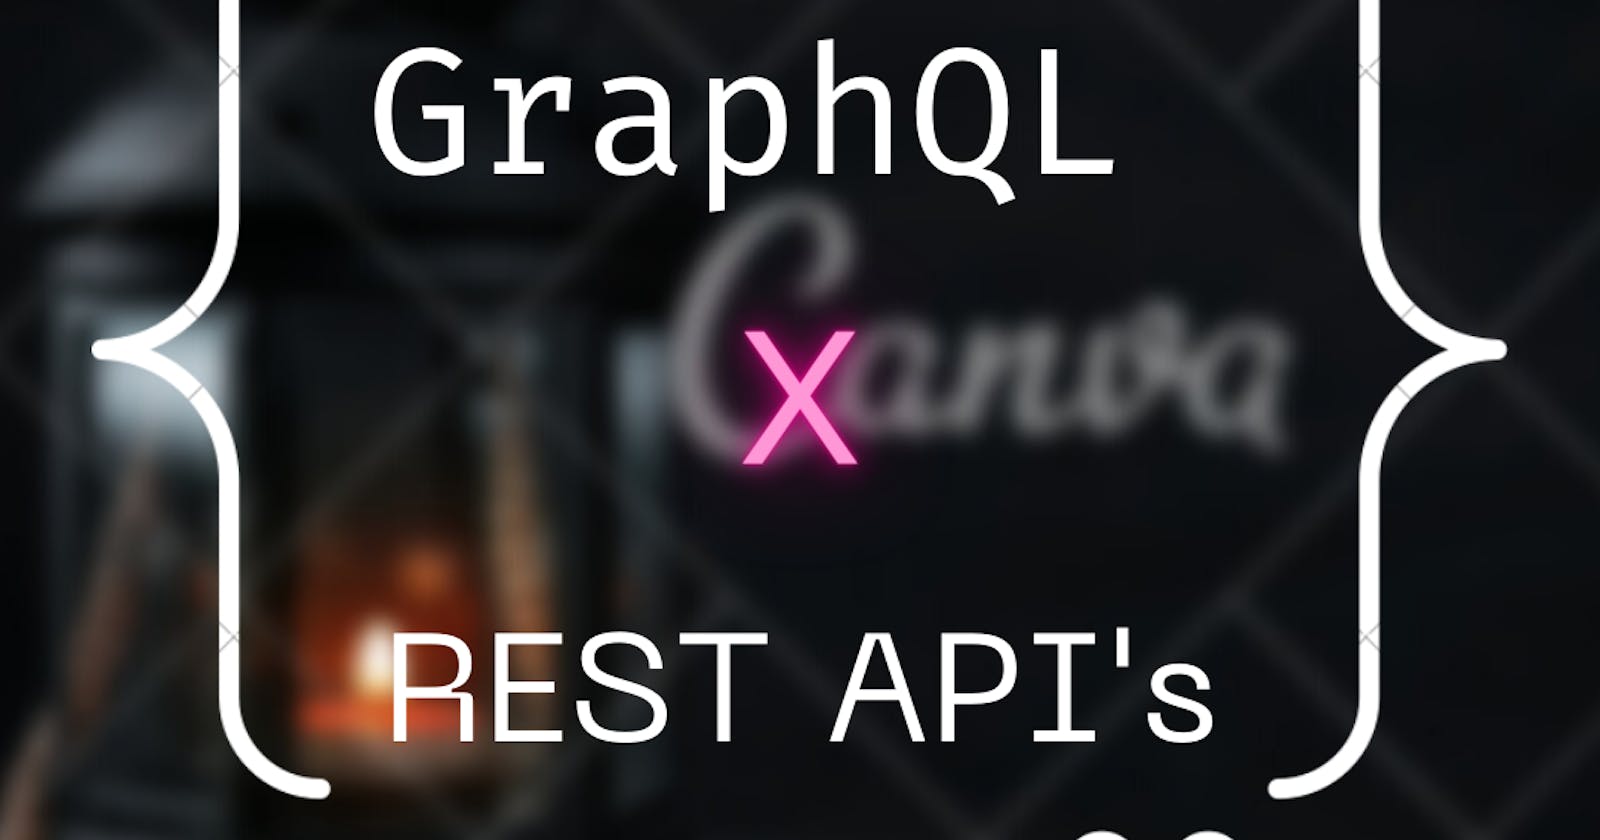 overview of GraphQL and how it compares to REST API's